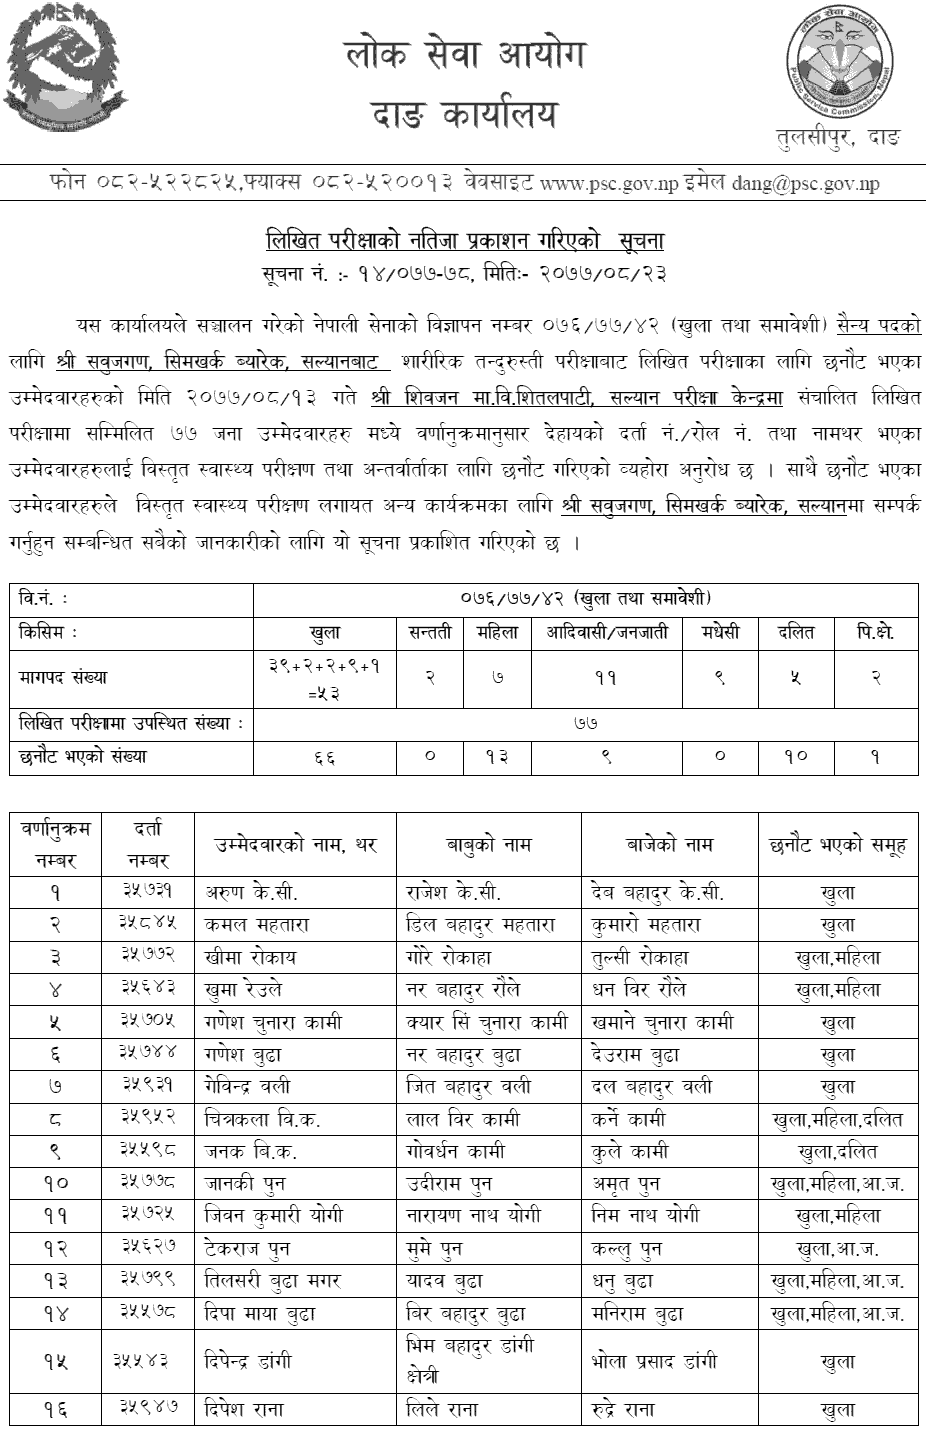 Lok Sewa Aayog Dang Published Written Exam Result of Nepal Army Soldier